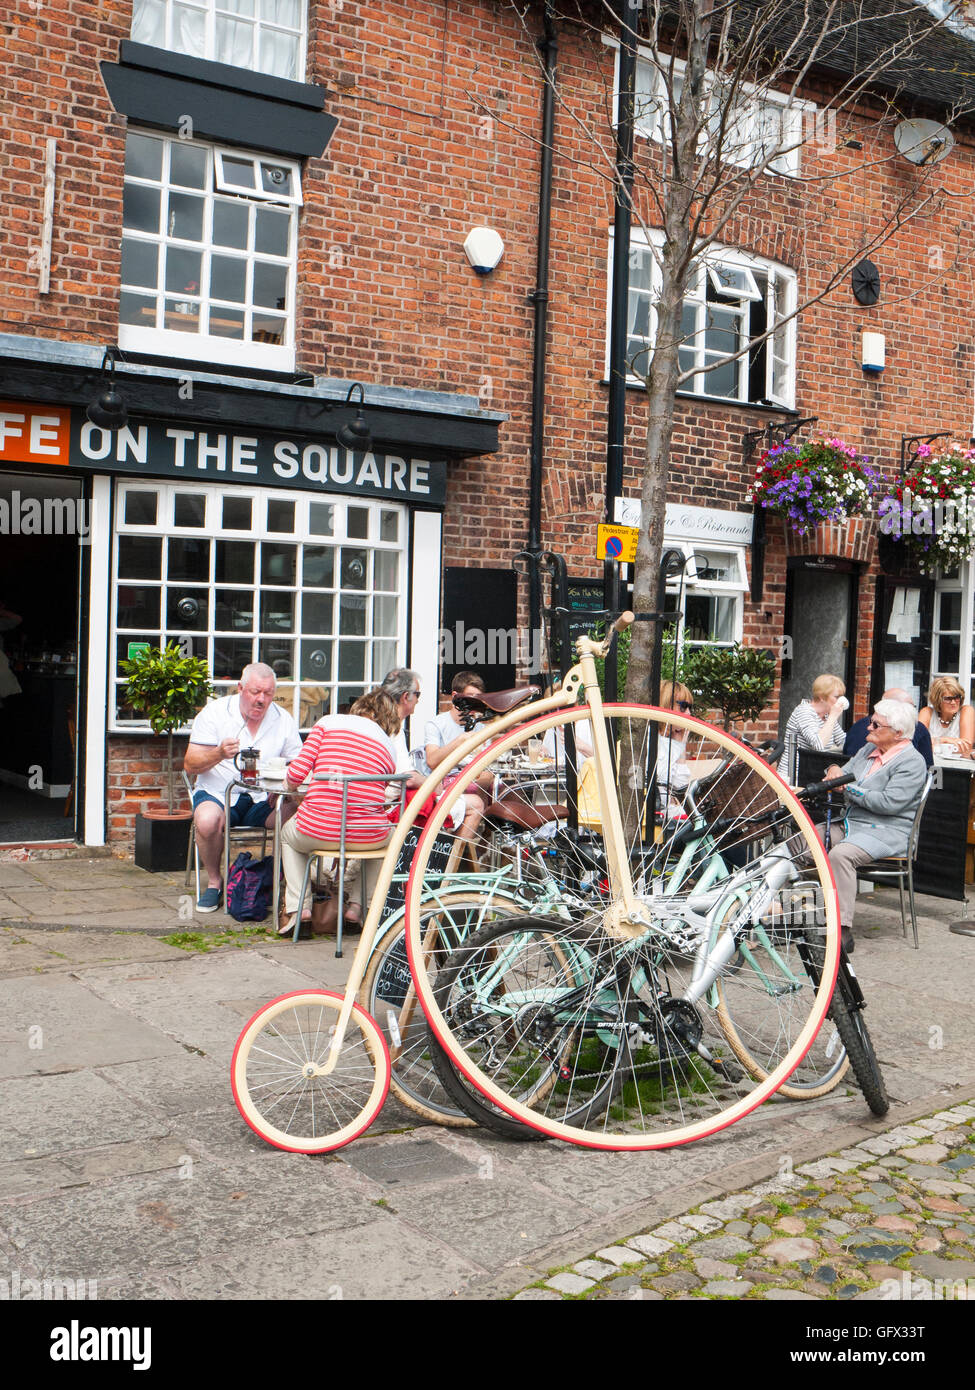 Penny farthing bicycle on the Square in Sandbach Cheshire UK Stock Photo